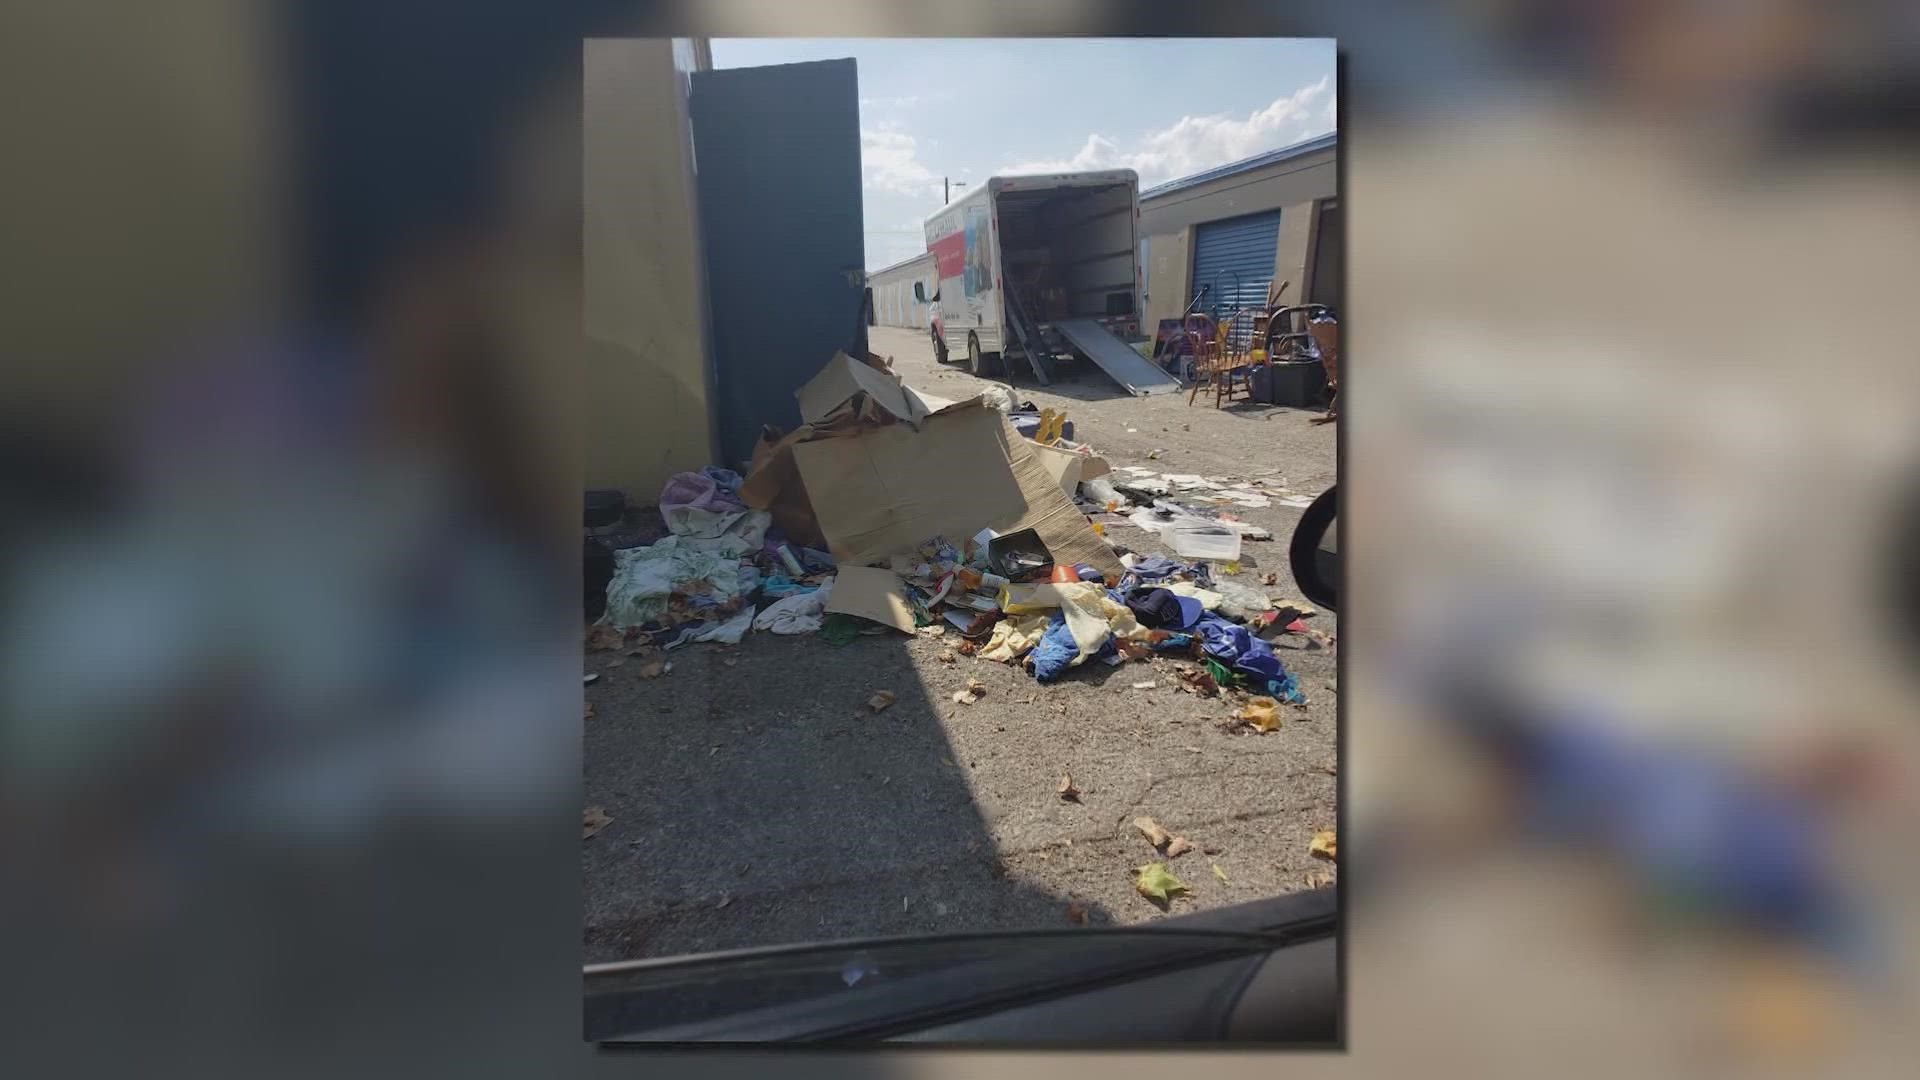 San Antonio Police say two men were arrested at the scene after a reported burglary at the Otter Self Storage off of Loop 410 near Marbach Road.